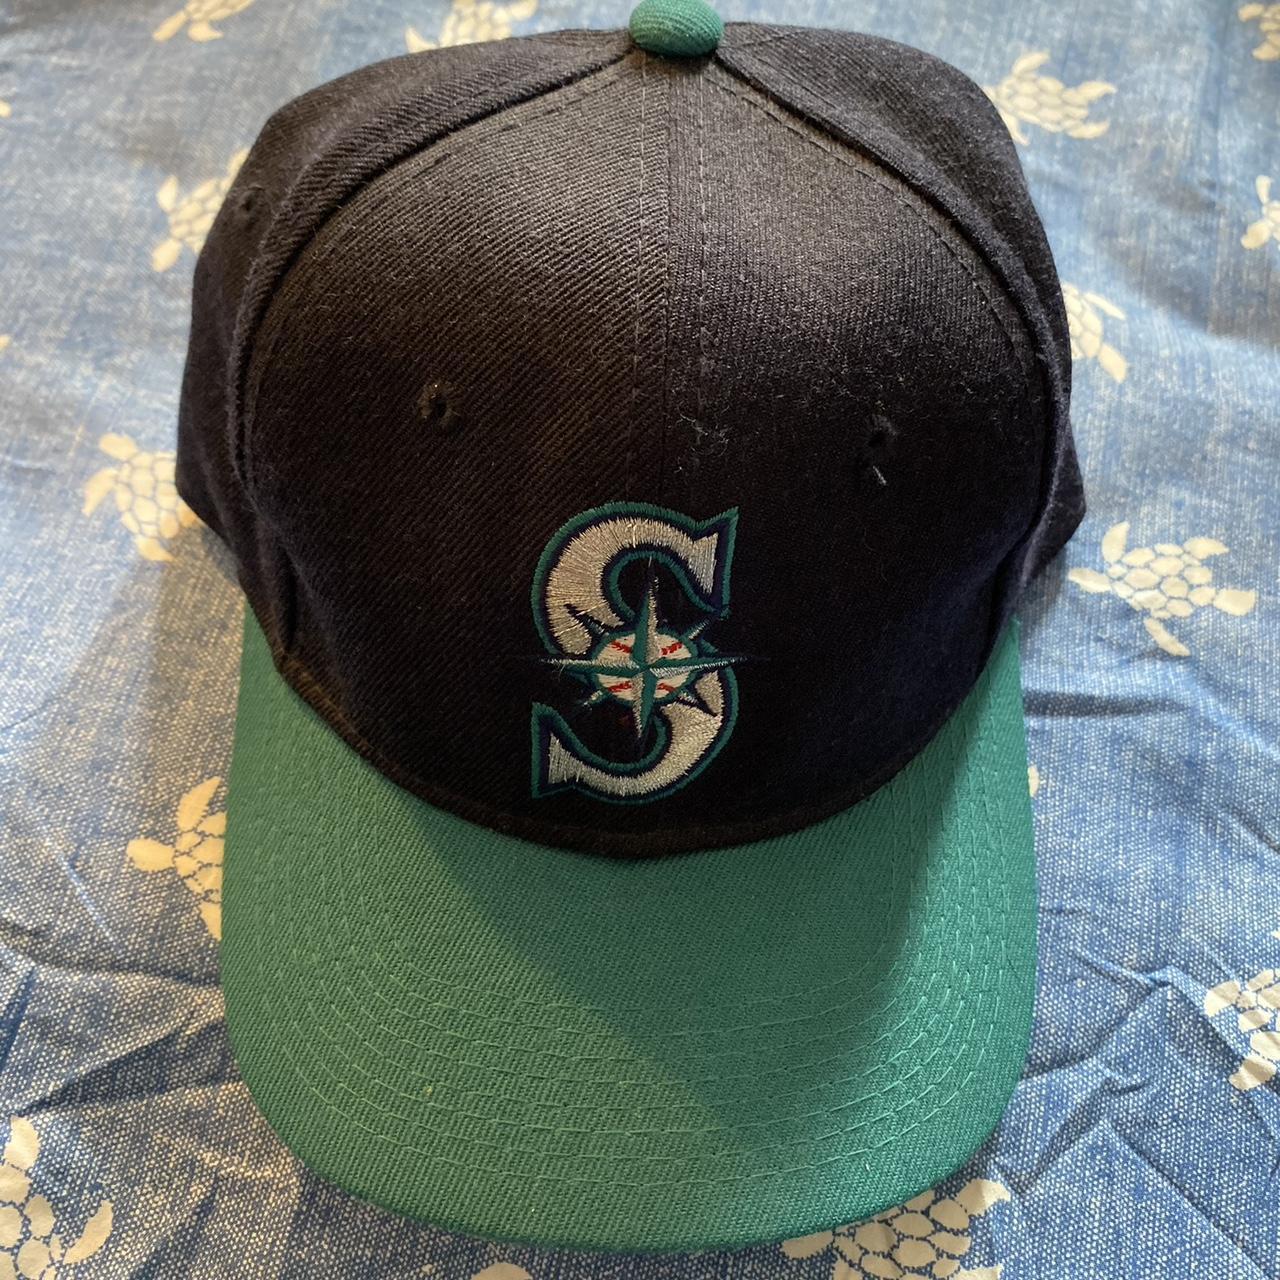 Vintage Seattle Mariners Fitted Hat Sports Specialties Size 7 